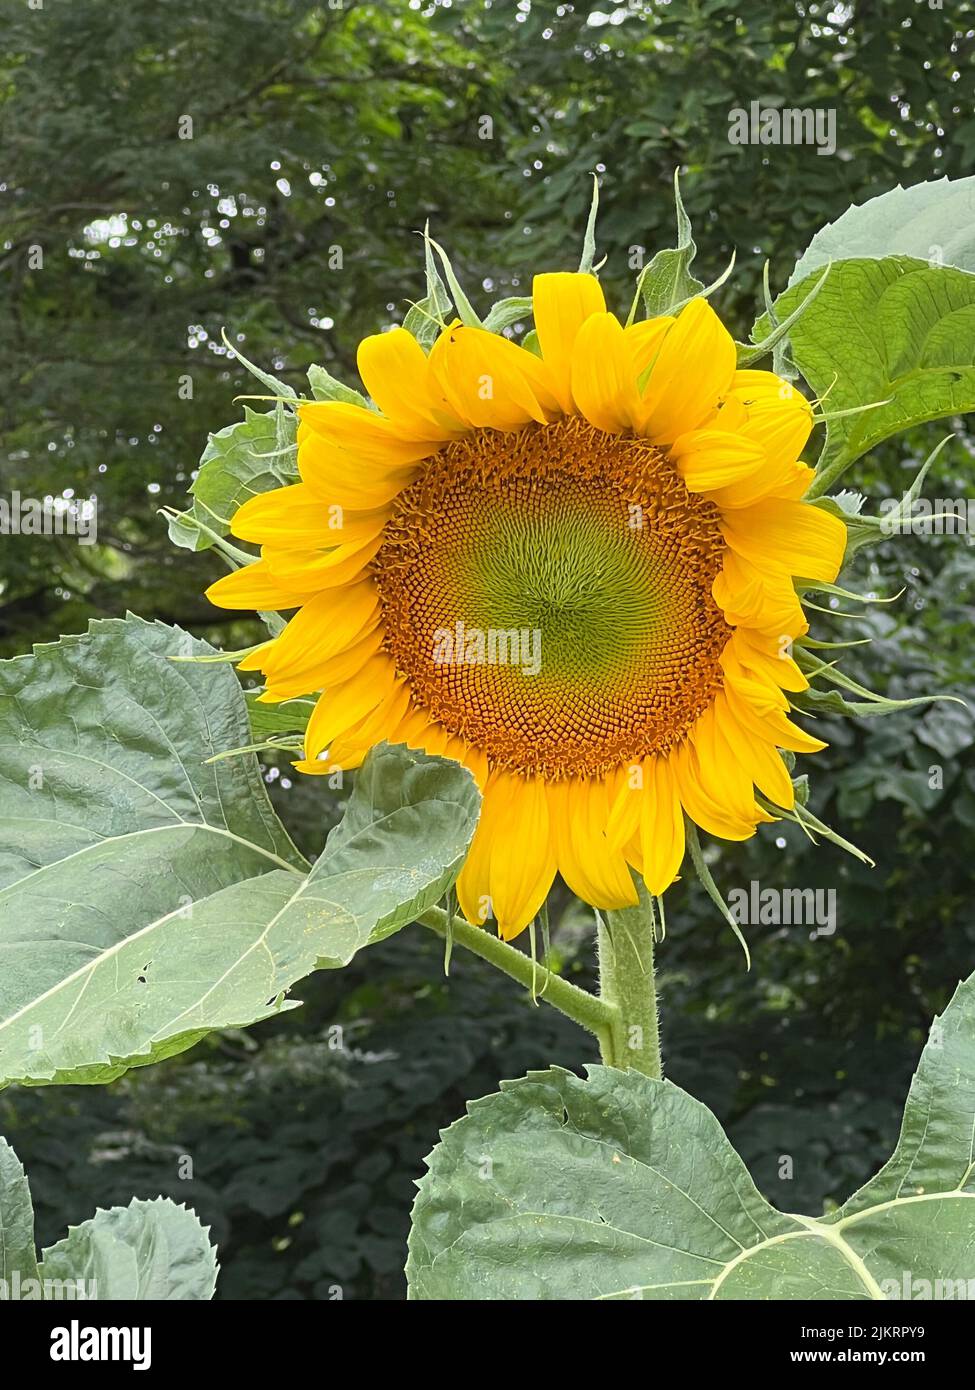 Smiling sunflower amidst its leaves at the Brooklyn Botanic Garden in Brooklyn, New York. Stock Photo